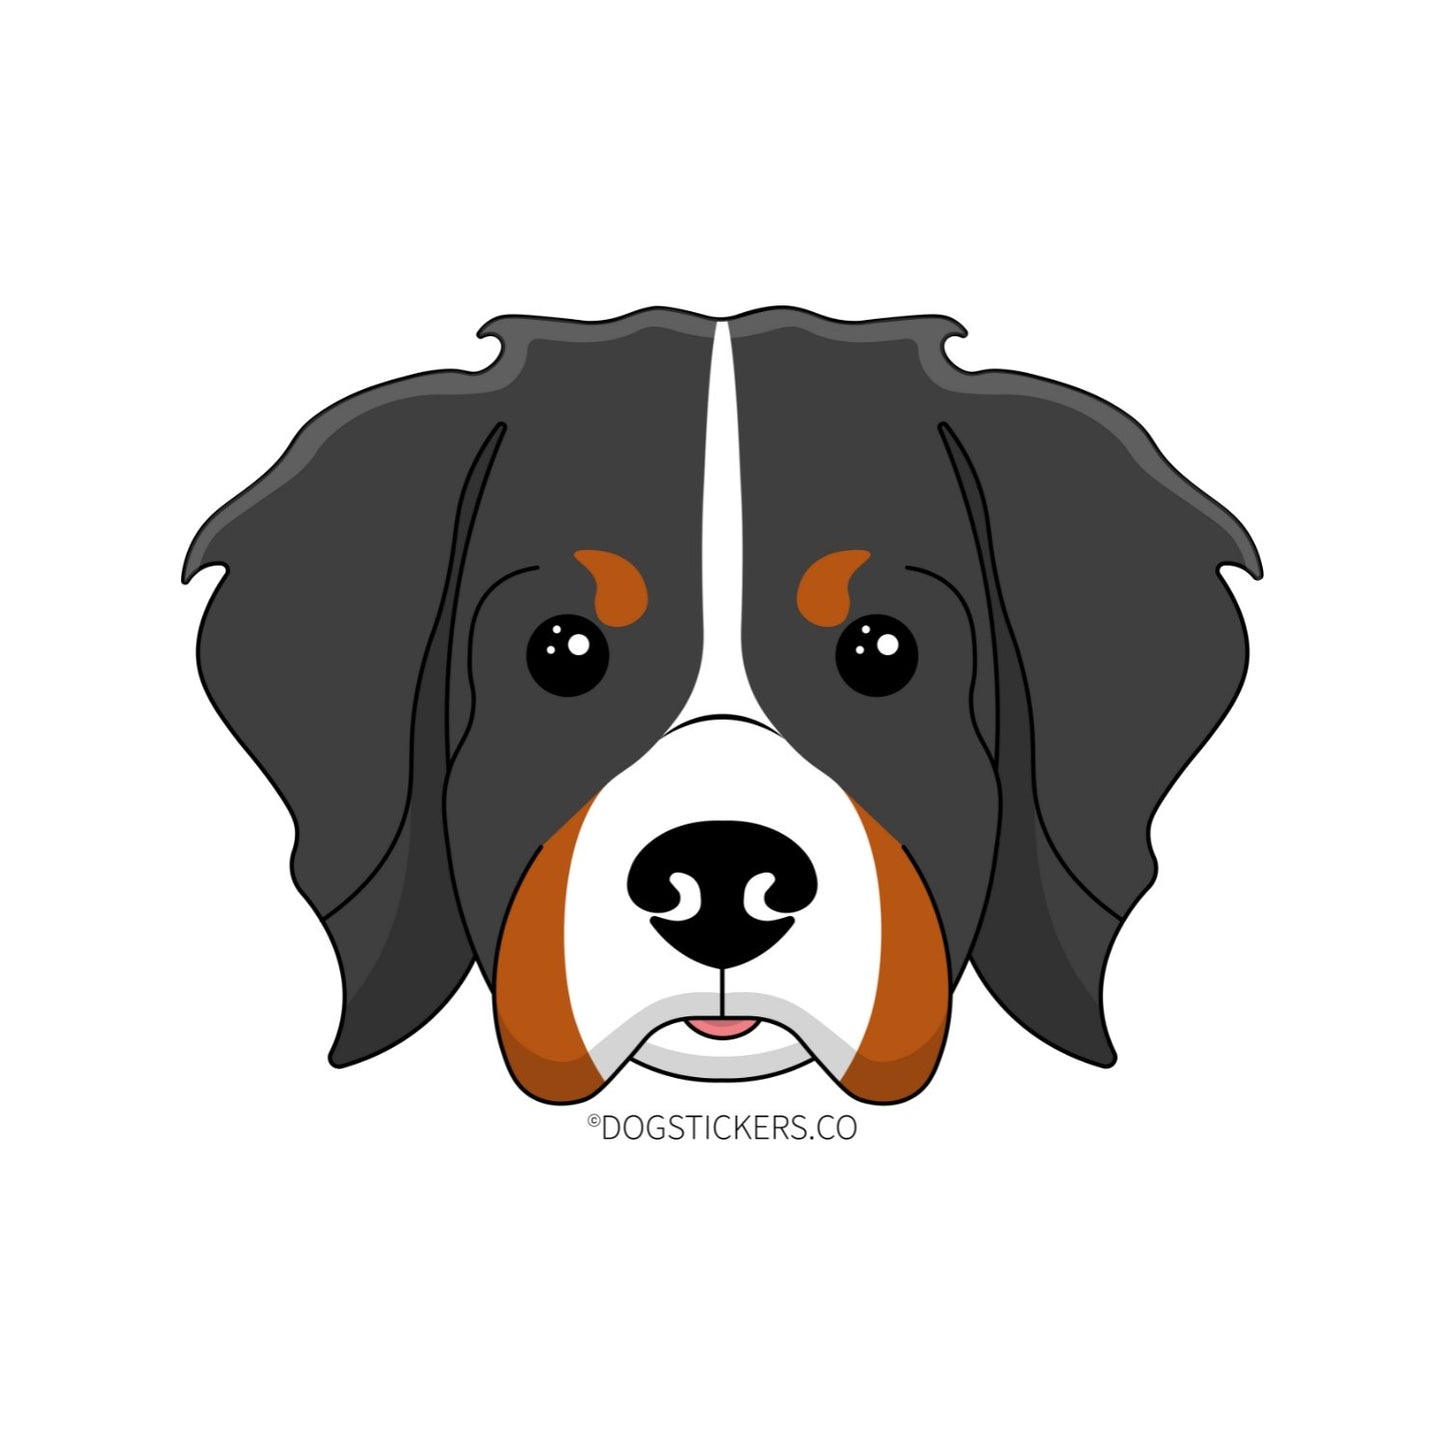 Bernese Mountain Dog - Dogstickers.co